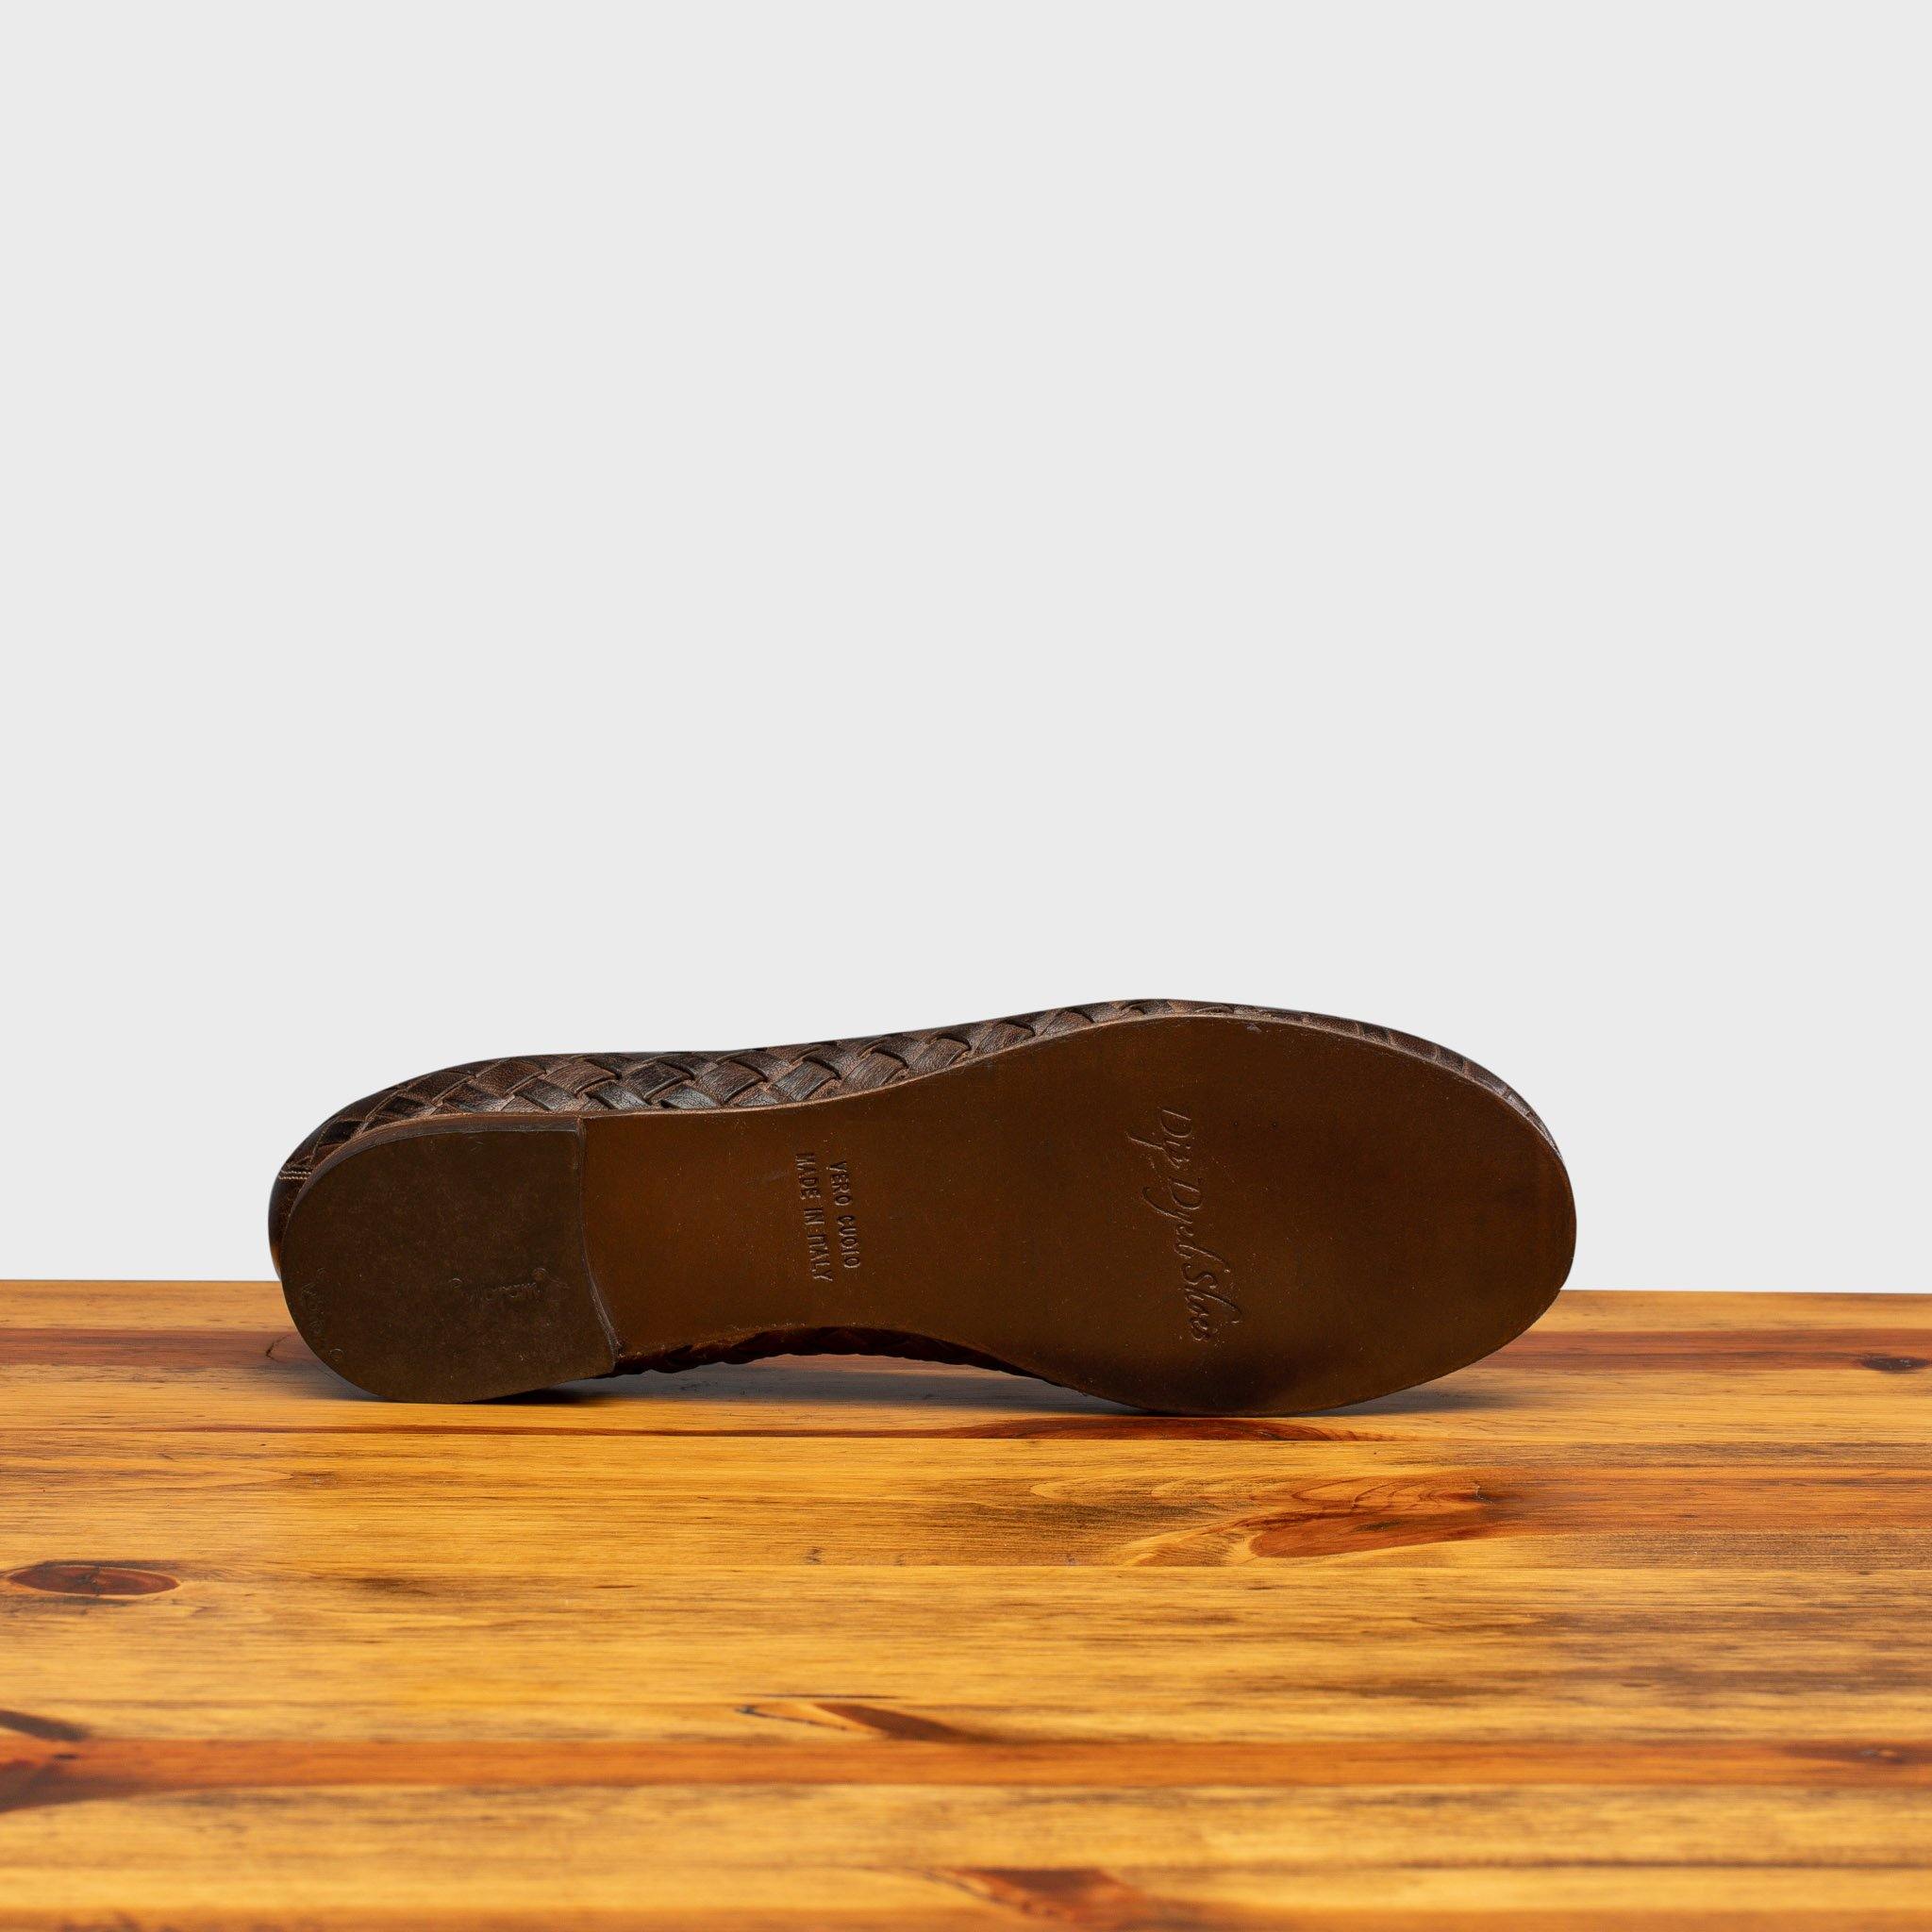 Full leather outsole of B940 Calzoleria Toscana Tobacco Woven Melania Ballerina on top of a wooden table